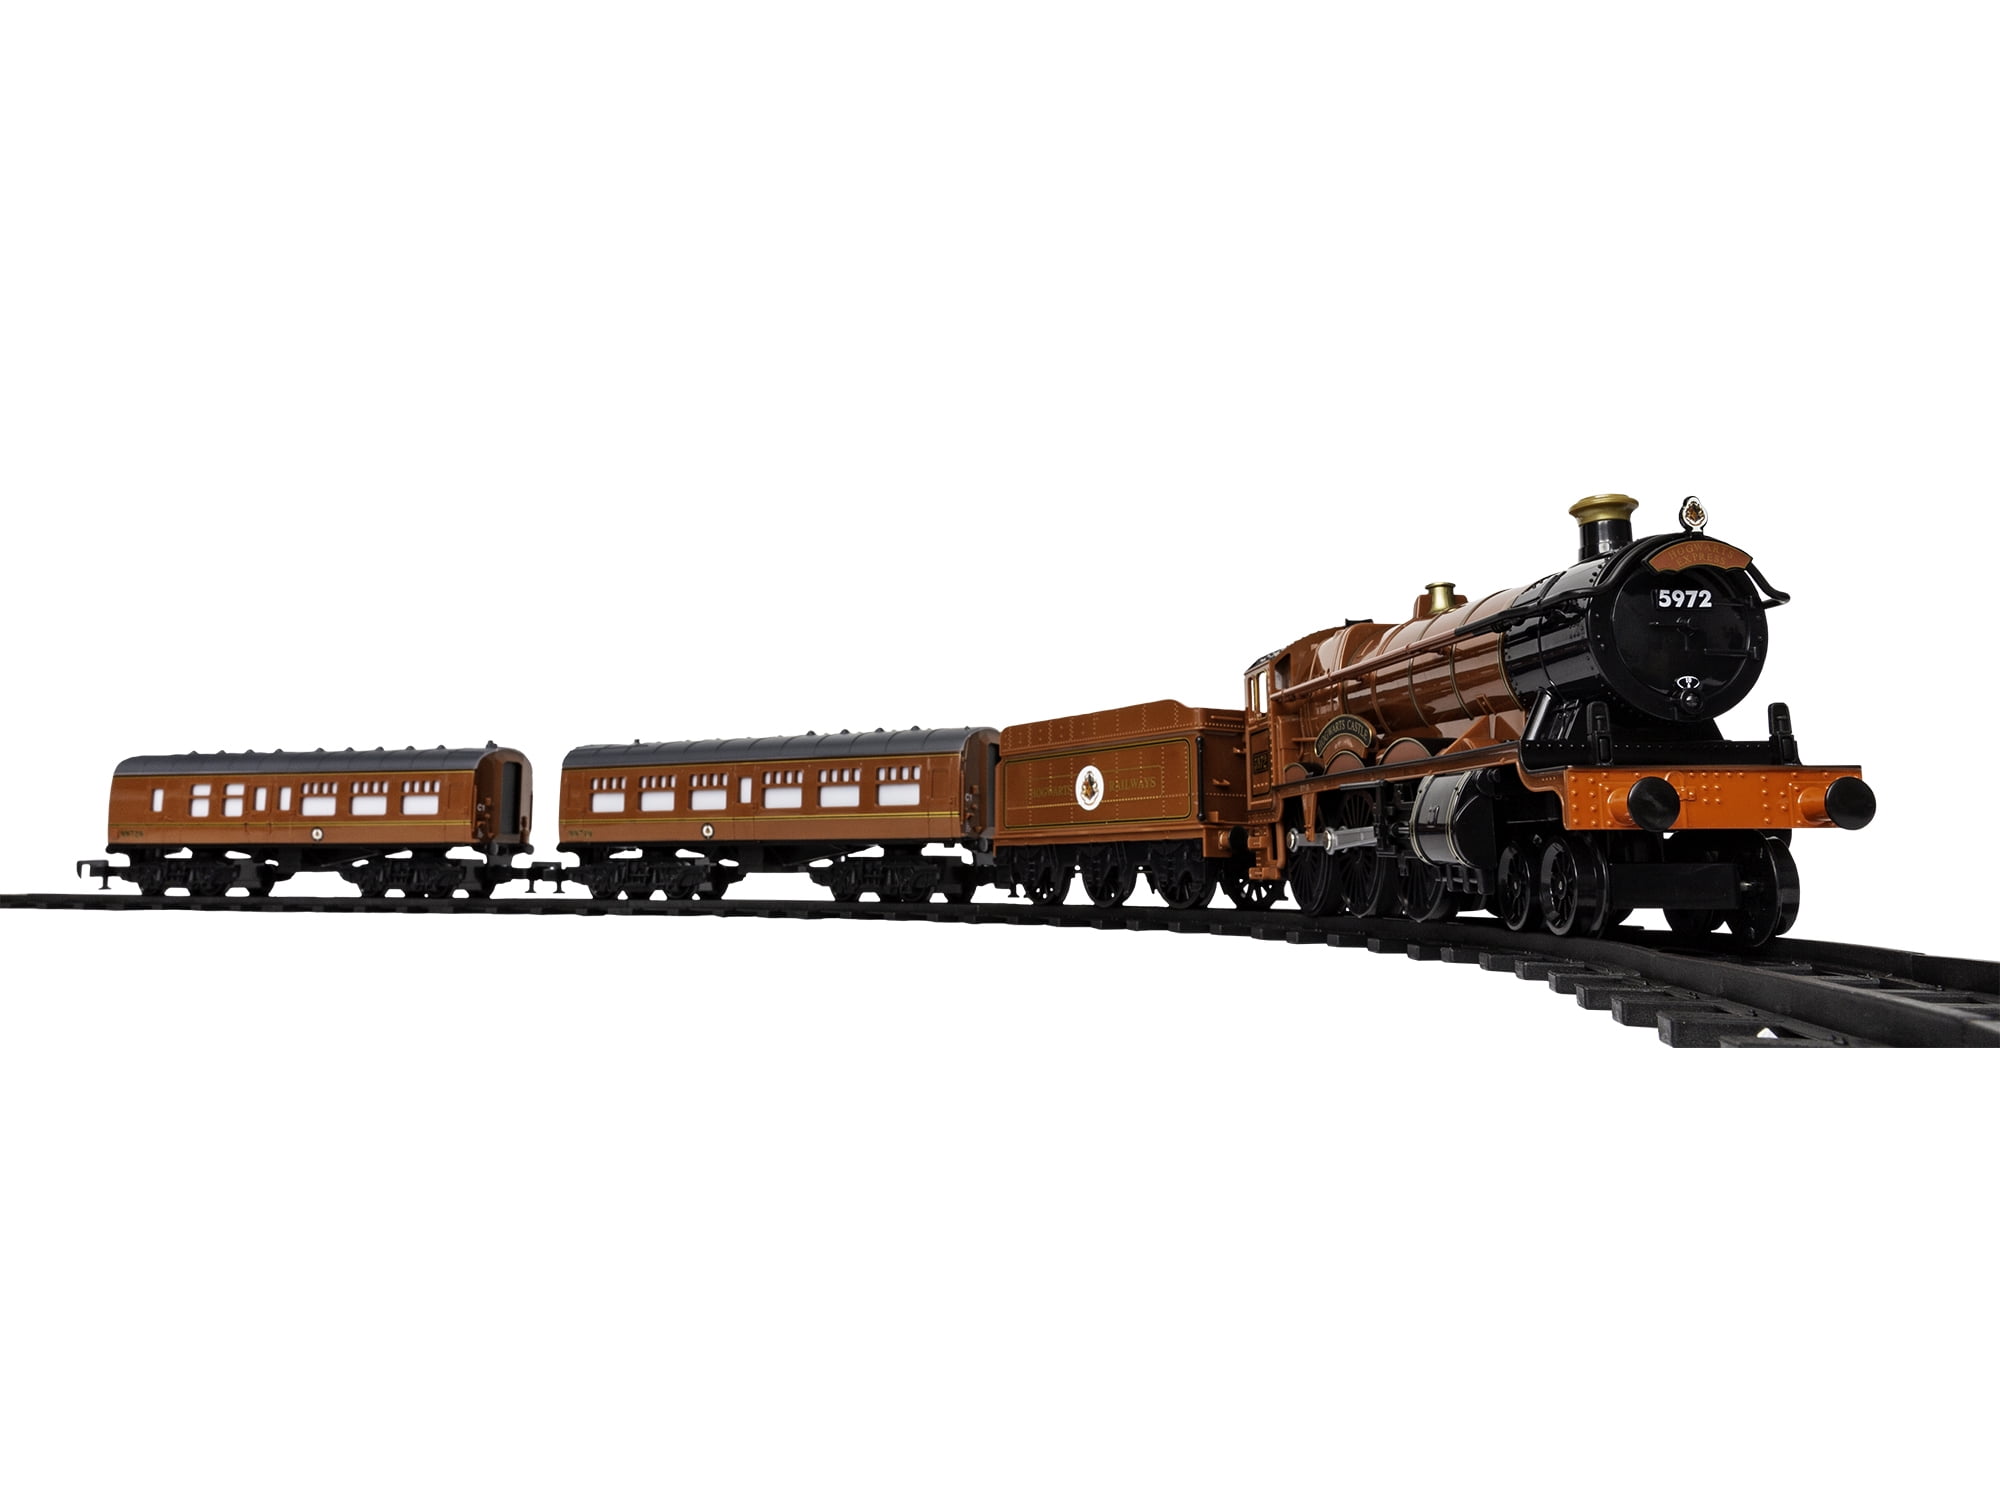 Details about   ArtCreativity Deluxe Train Set for Kids Battery-Operated Toy with 4 Cars and 